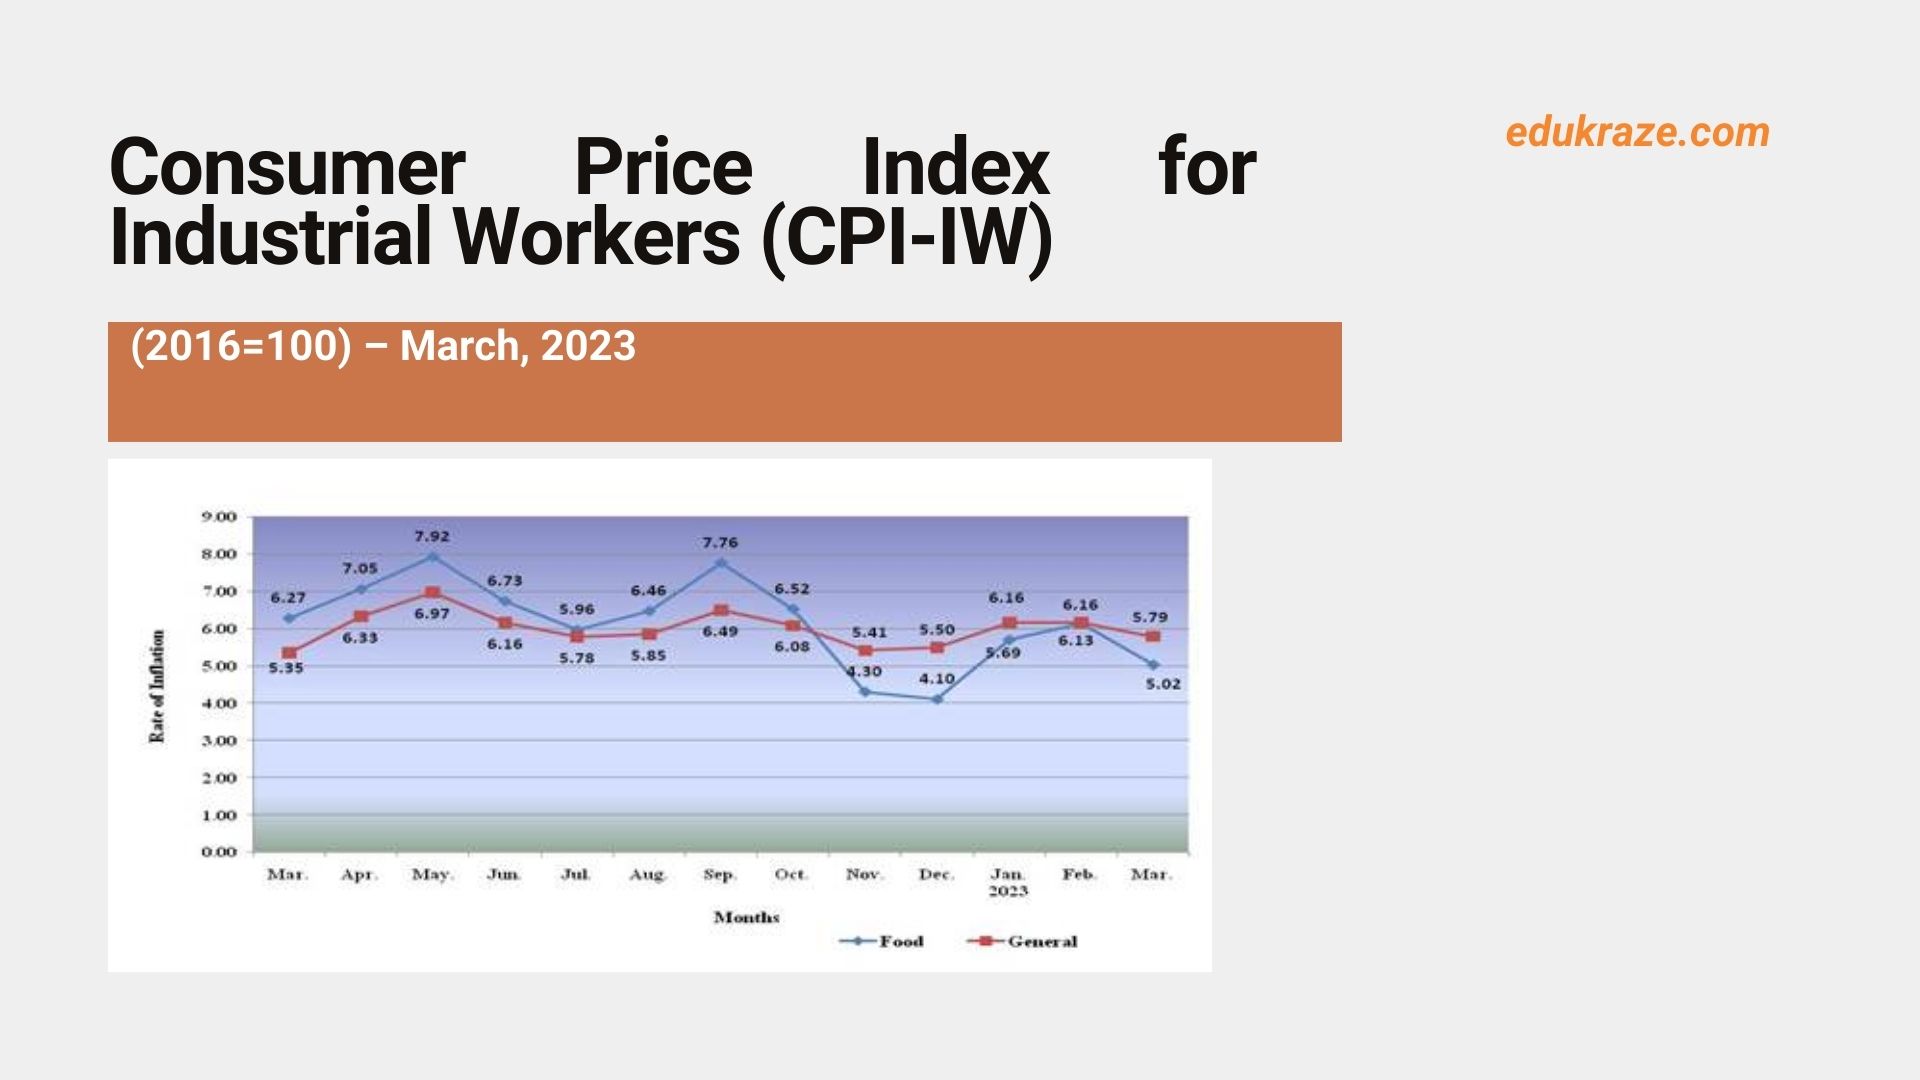 Labour Bureau releases CPI-IW for March 2023, showing a slight increase